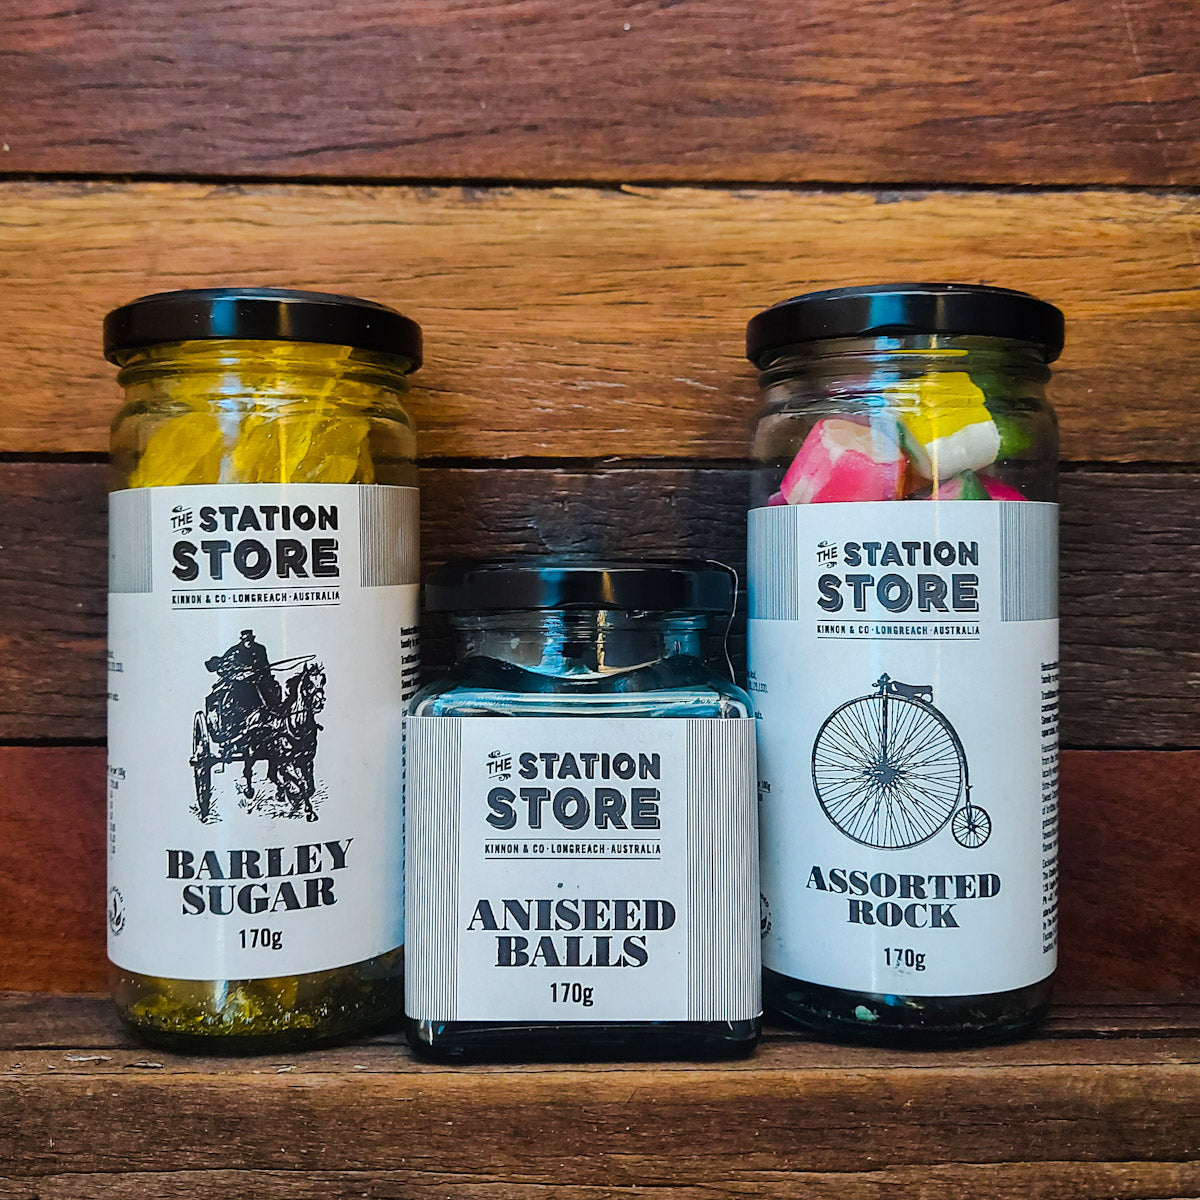 Barley Sugar lollies, Aniseed Balls and Assorted Rock lollies in glass jars. 